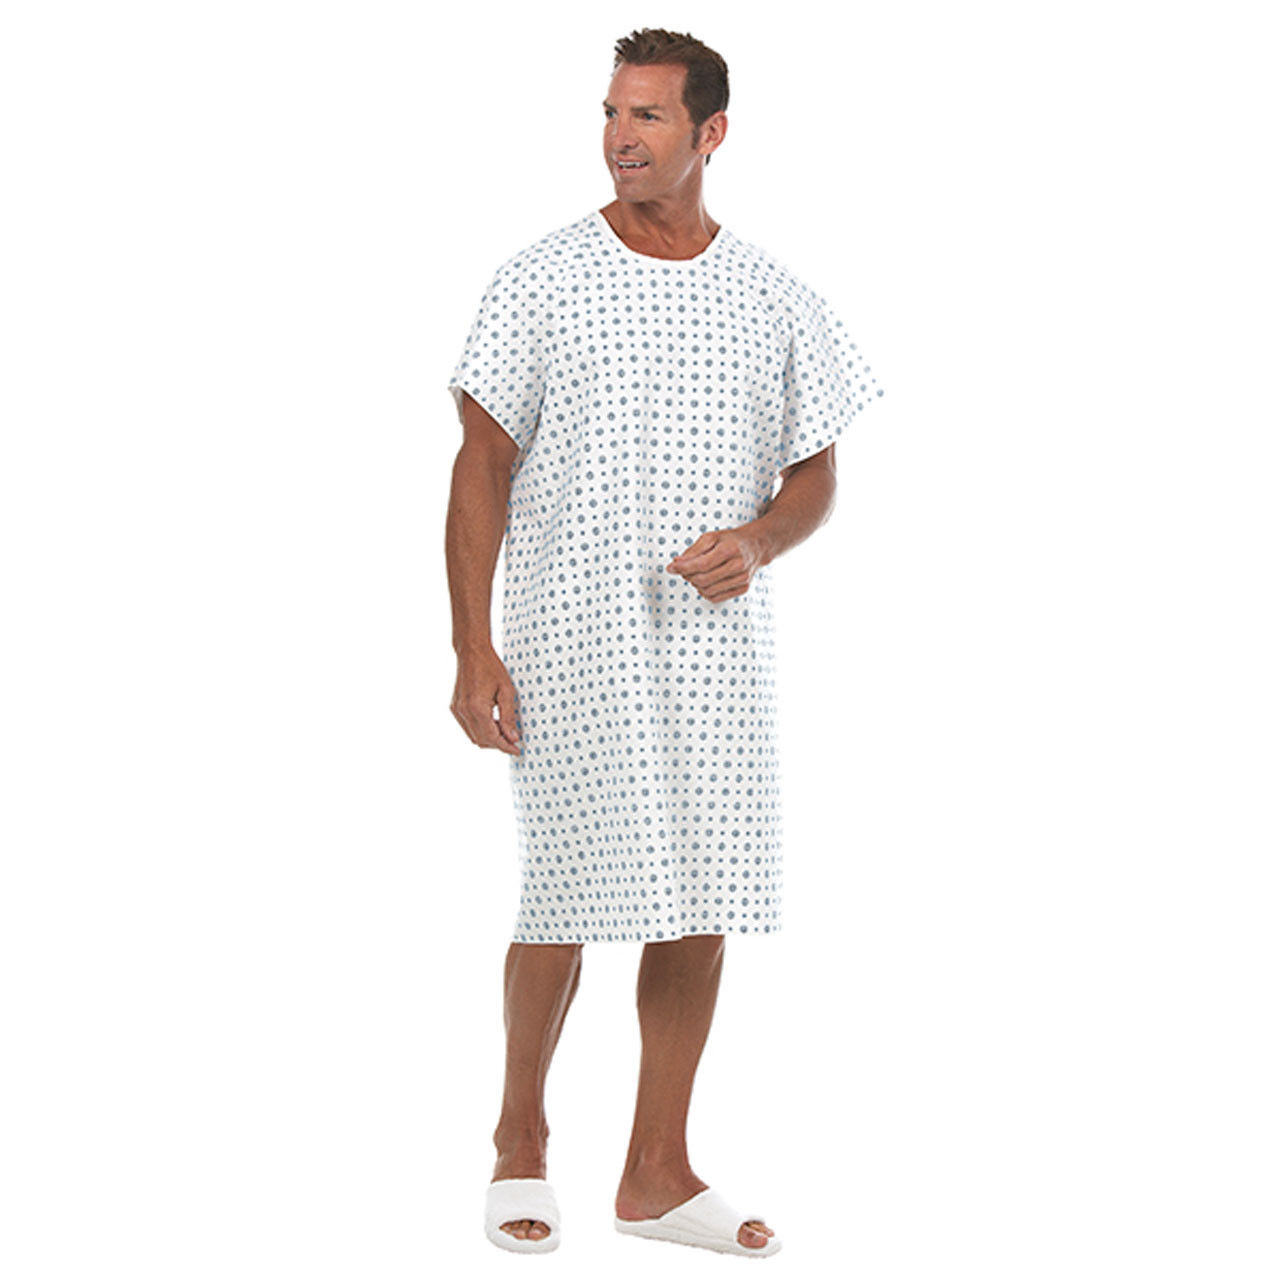 Are the backs of these comfortable patient gowns designed well?